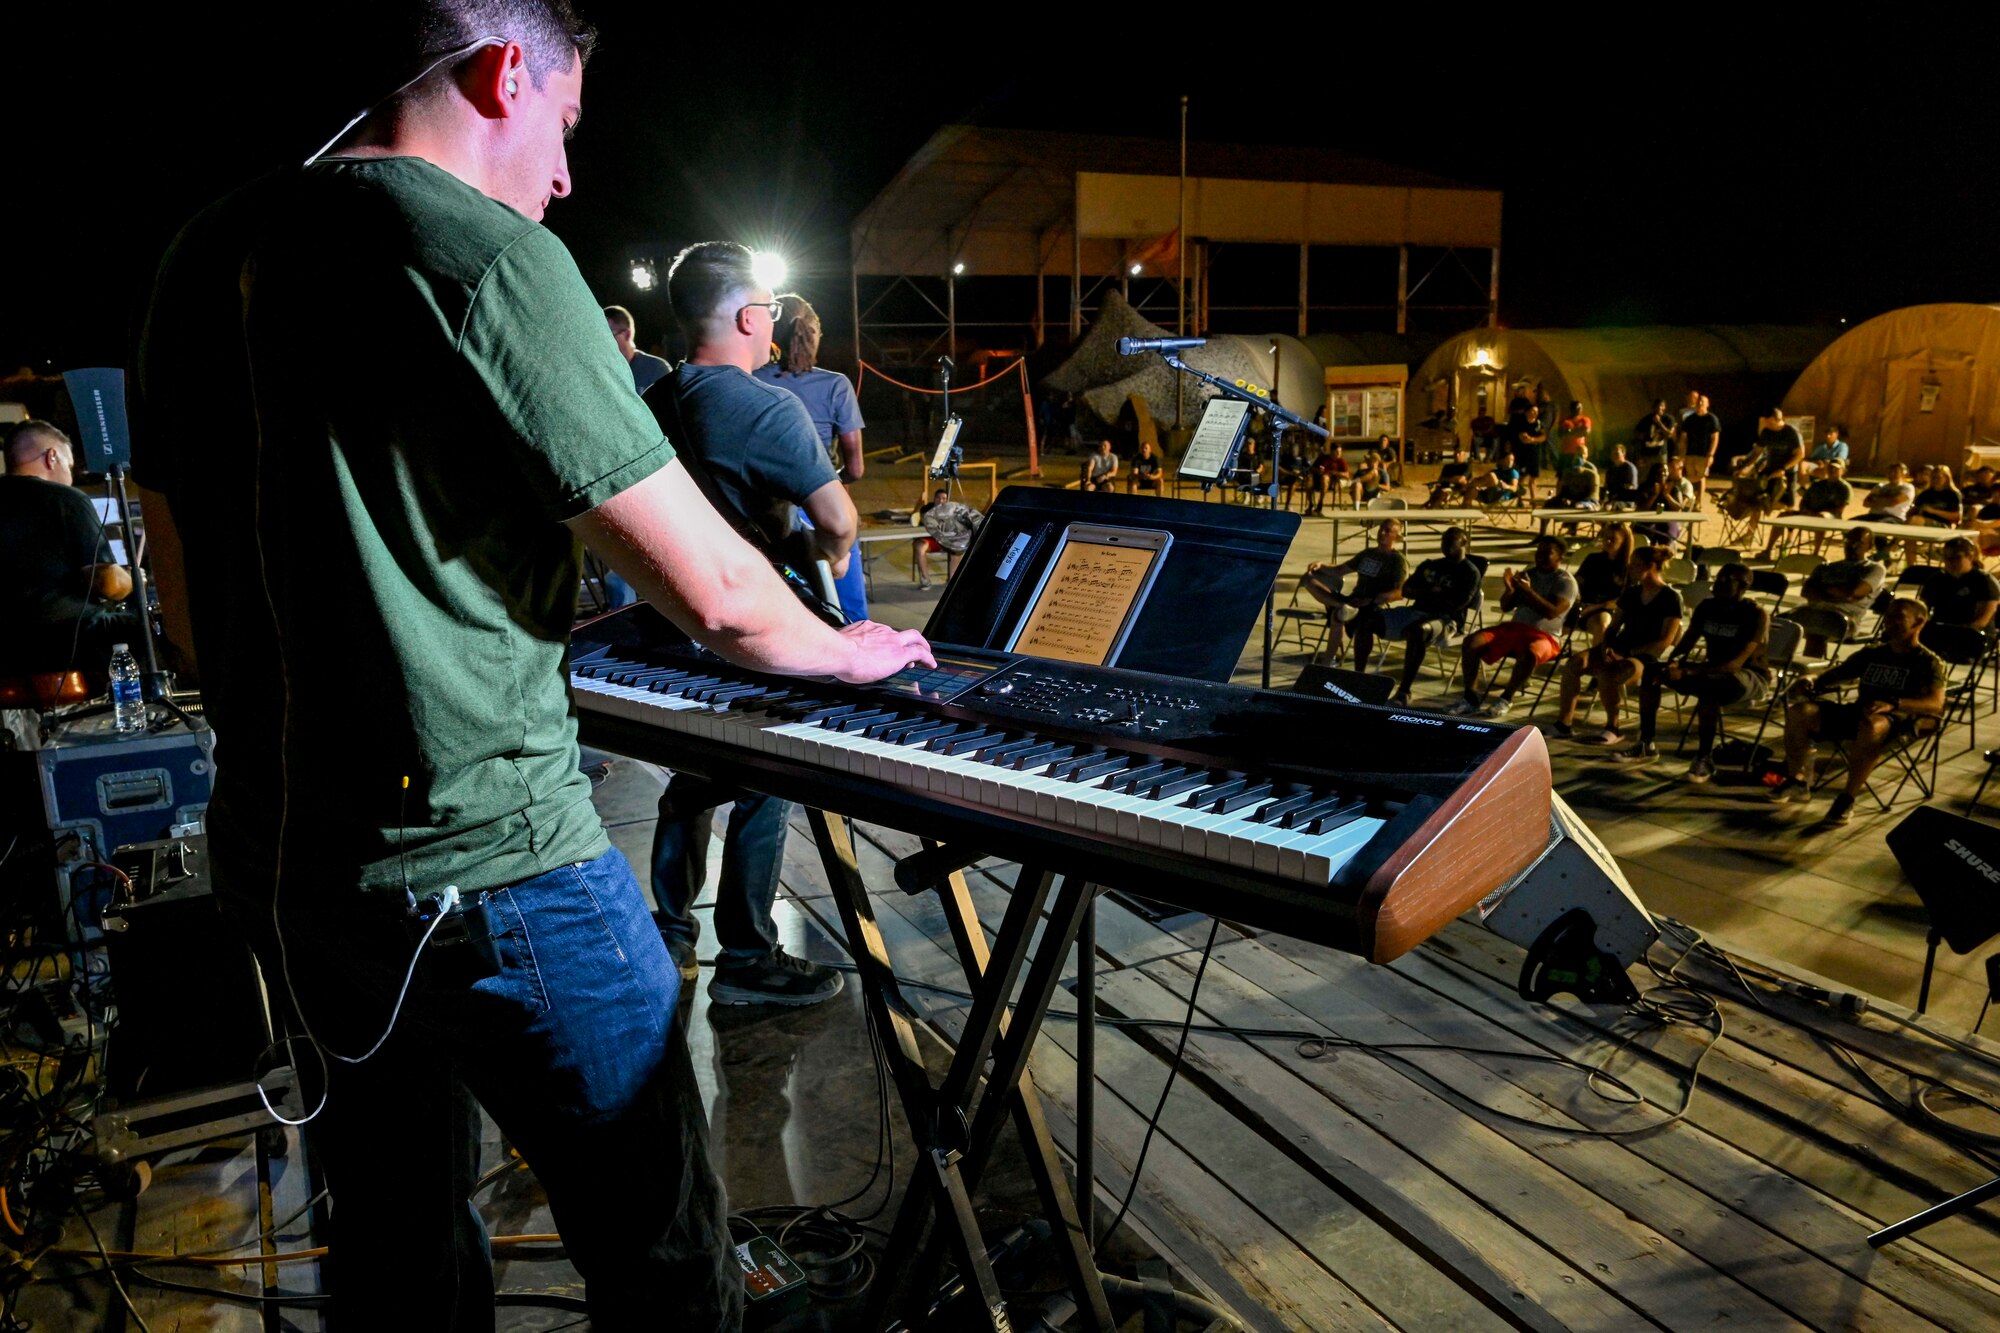 U.S. Air Force Airman 1st Class Phillip Castro, U.S. Air Forces Central Band pianist, performs during a concert at Prince Sultan Air Base, Kingdom of Saudi Arabia, Oct. 16, 2021. The 378th Air Expeditionary Wing hosted two nights of performances in recognition and celebration of the base’s accomplishments throughout the past summer. (U.S. Air Force photo by Capt. Rachel Buitrago)